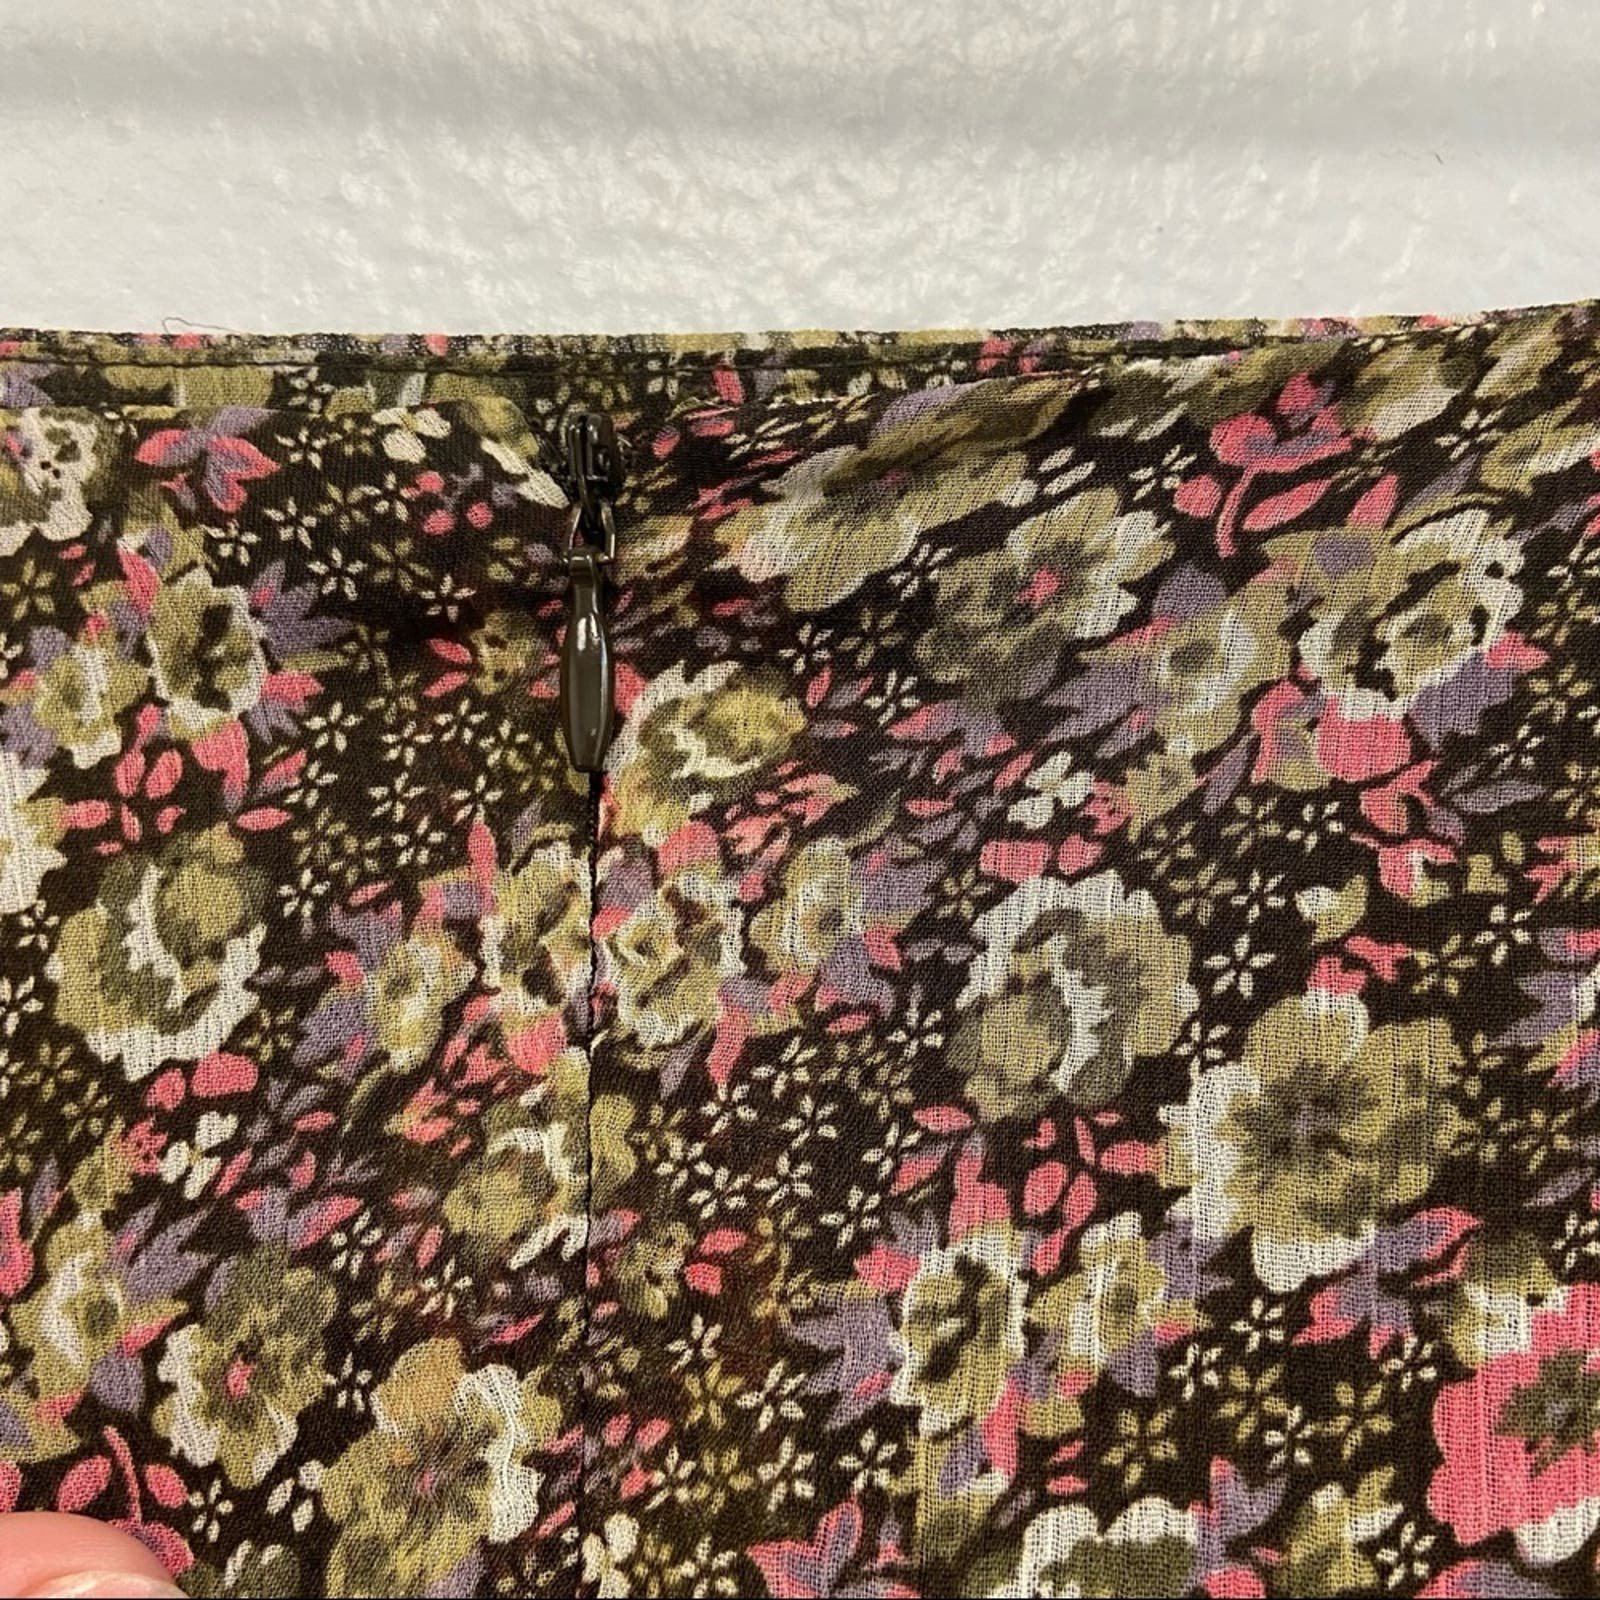 High quality New Walter Baker Becca Ruffled Floral Print Mini Skirt in Tawny Forest Size 8 lrVFBhzo4 best sale